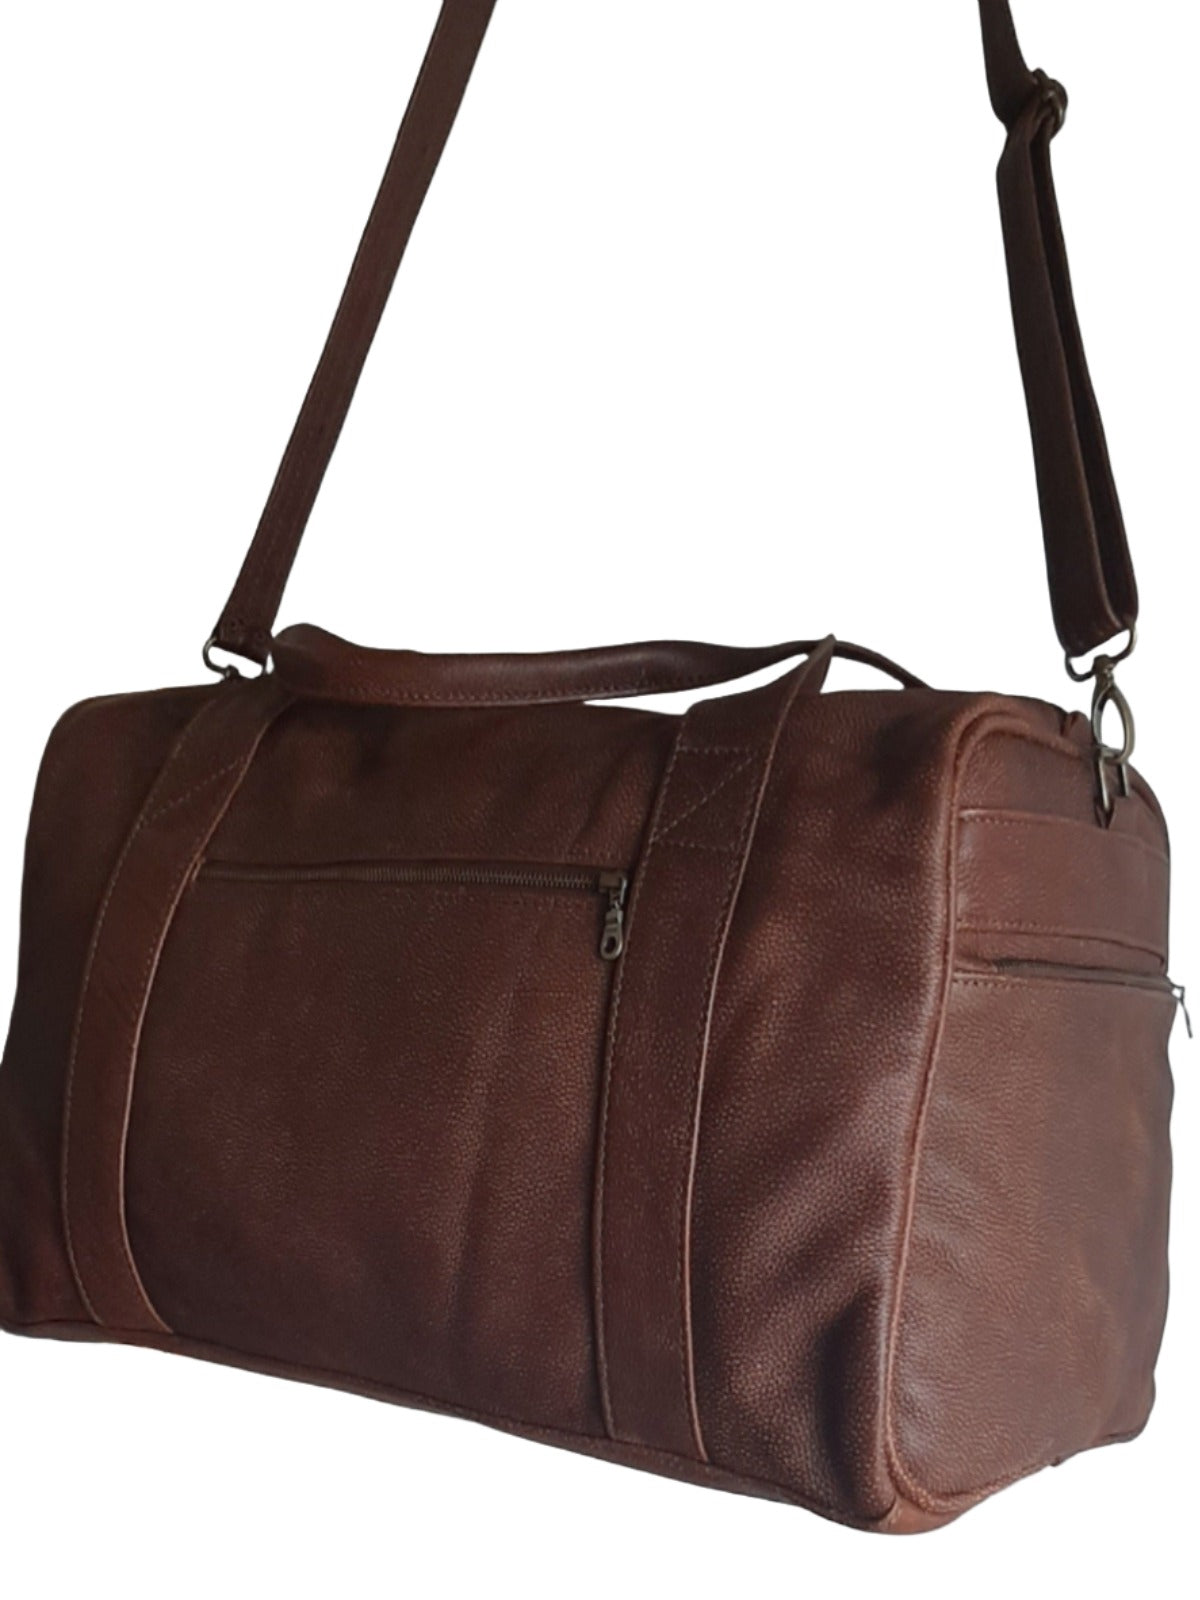 A beautiful genuine leather hand made Masai leather travel bag in bitter brown colour also known us Africa buffalo leather. 